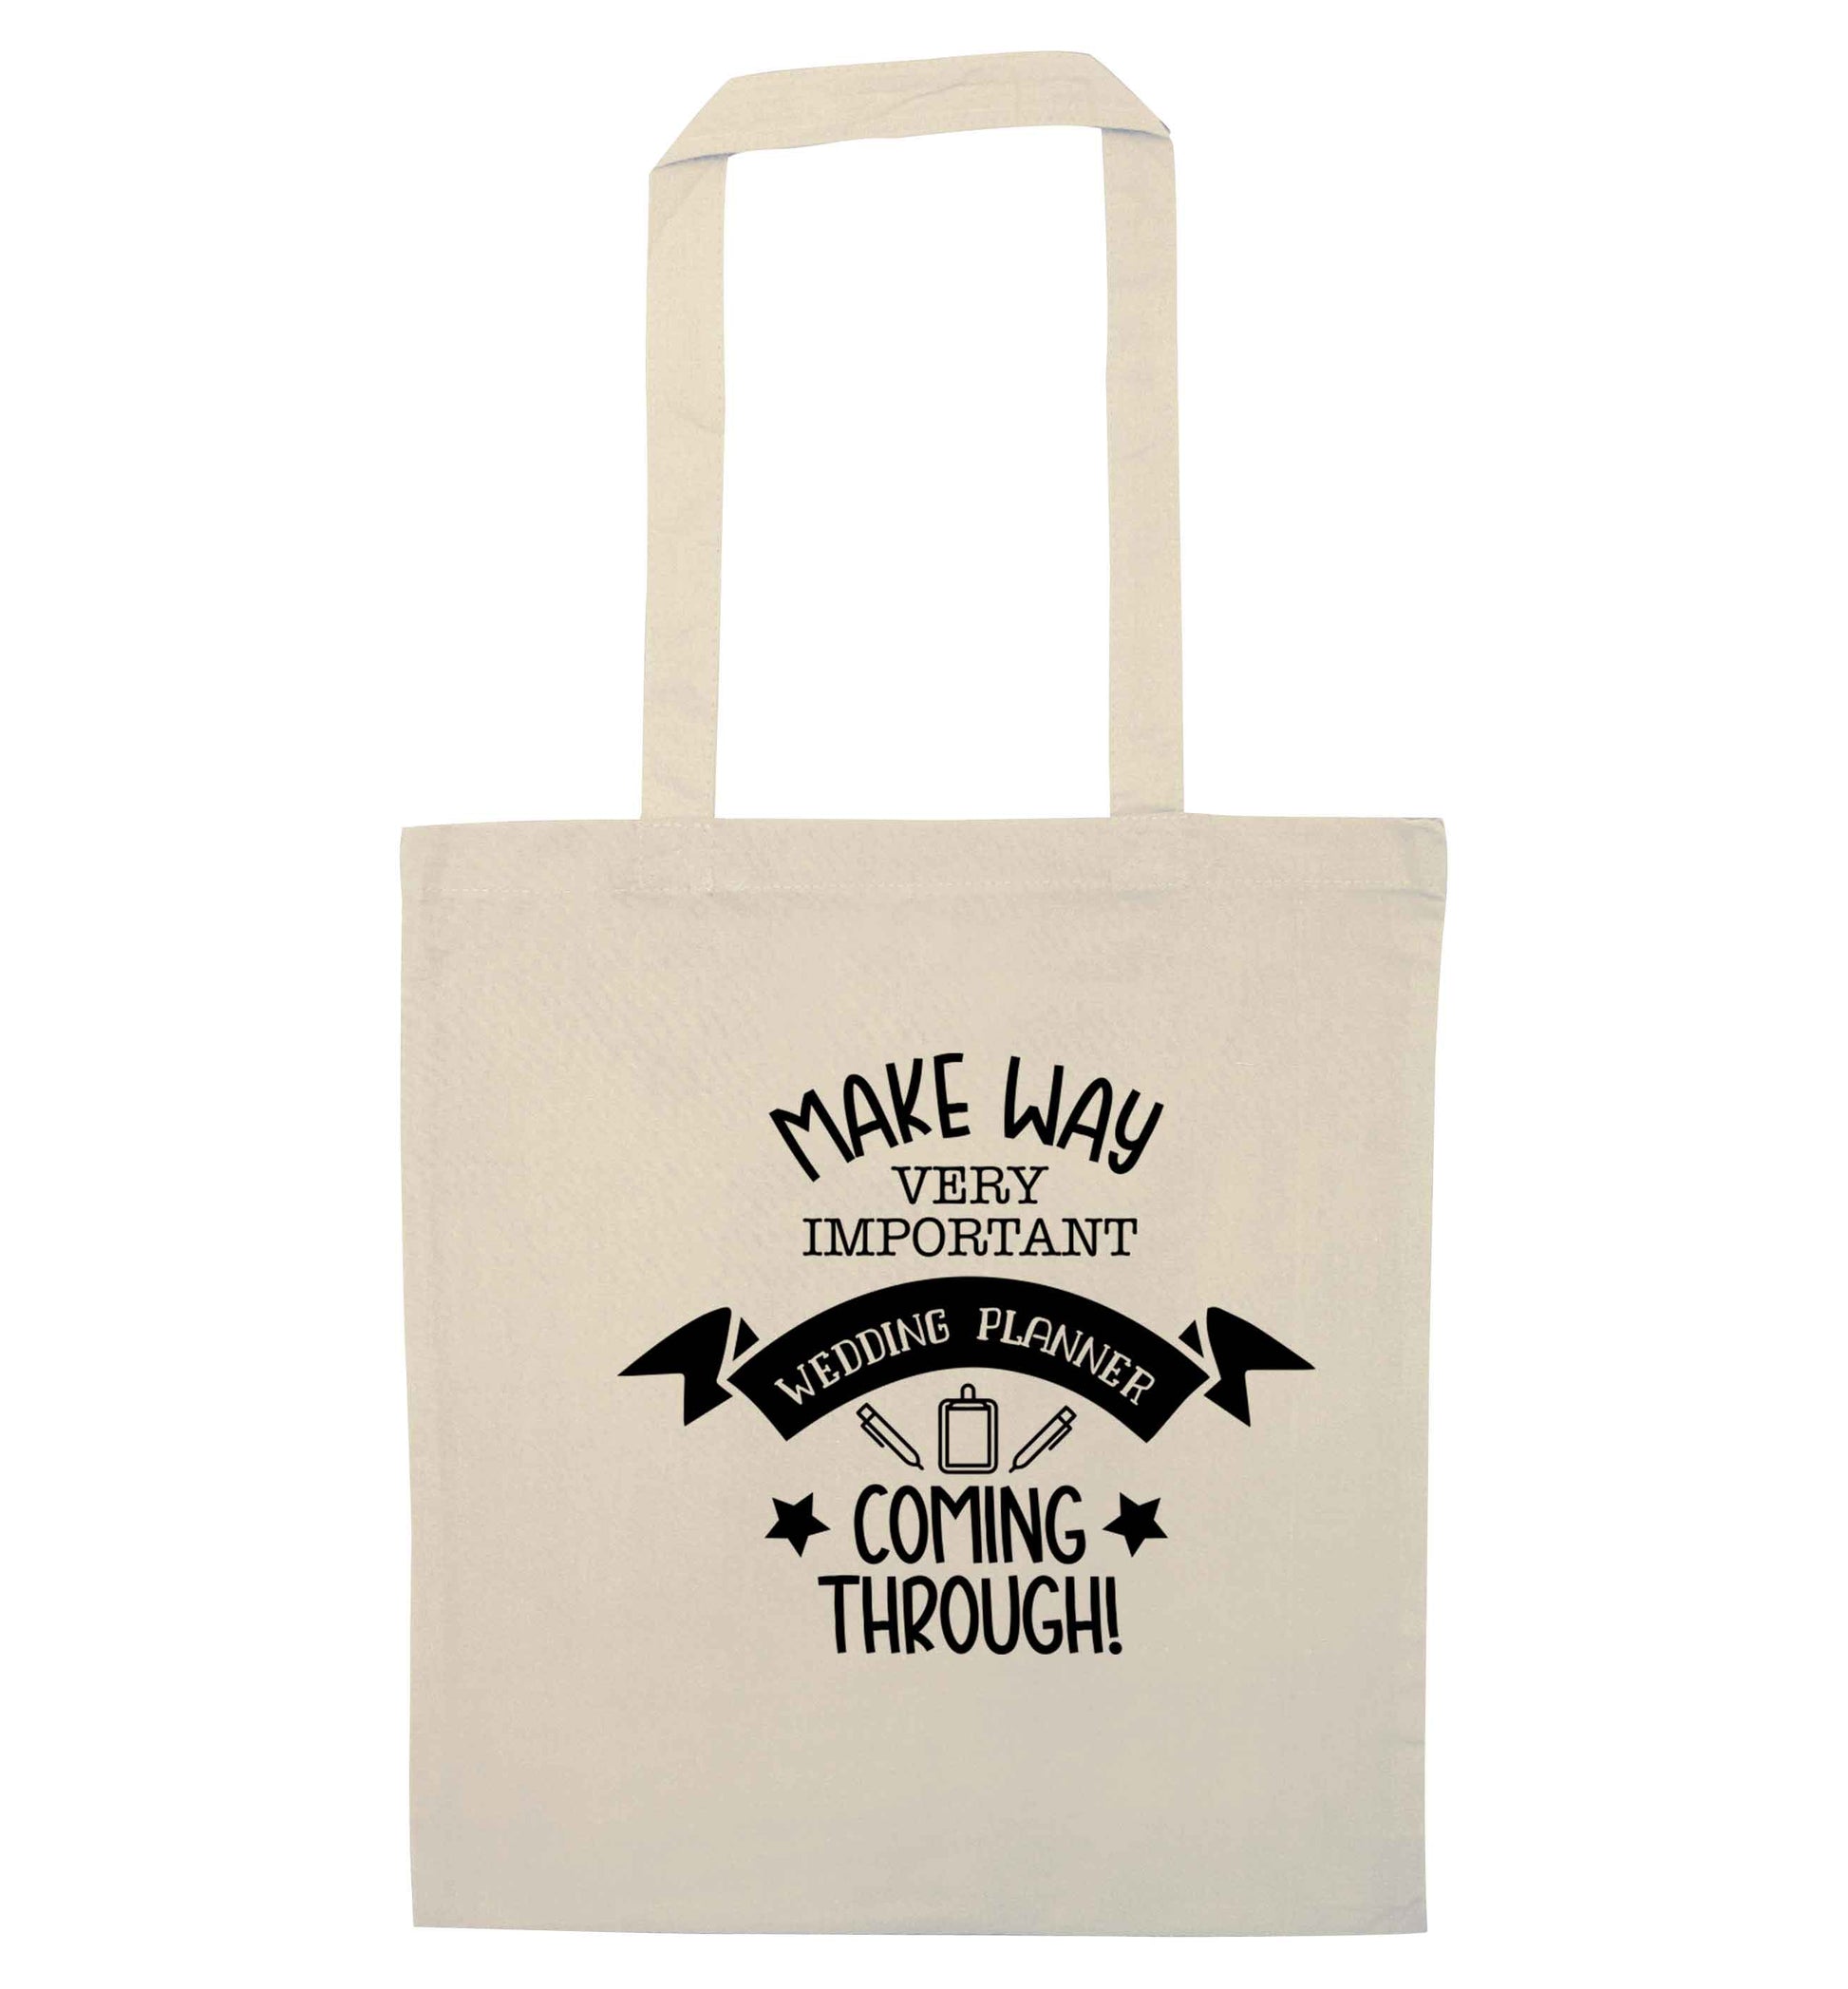 Make way very important wedding planner coming through natural tote bag